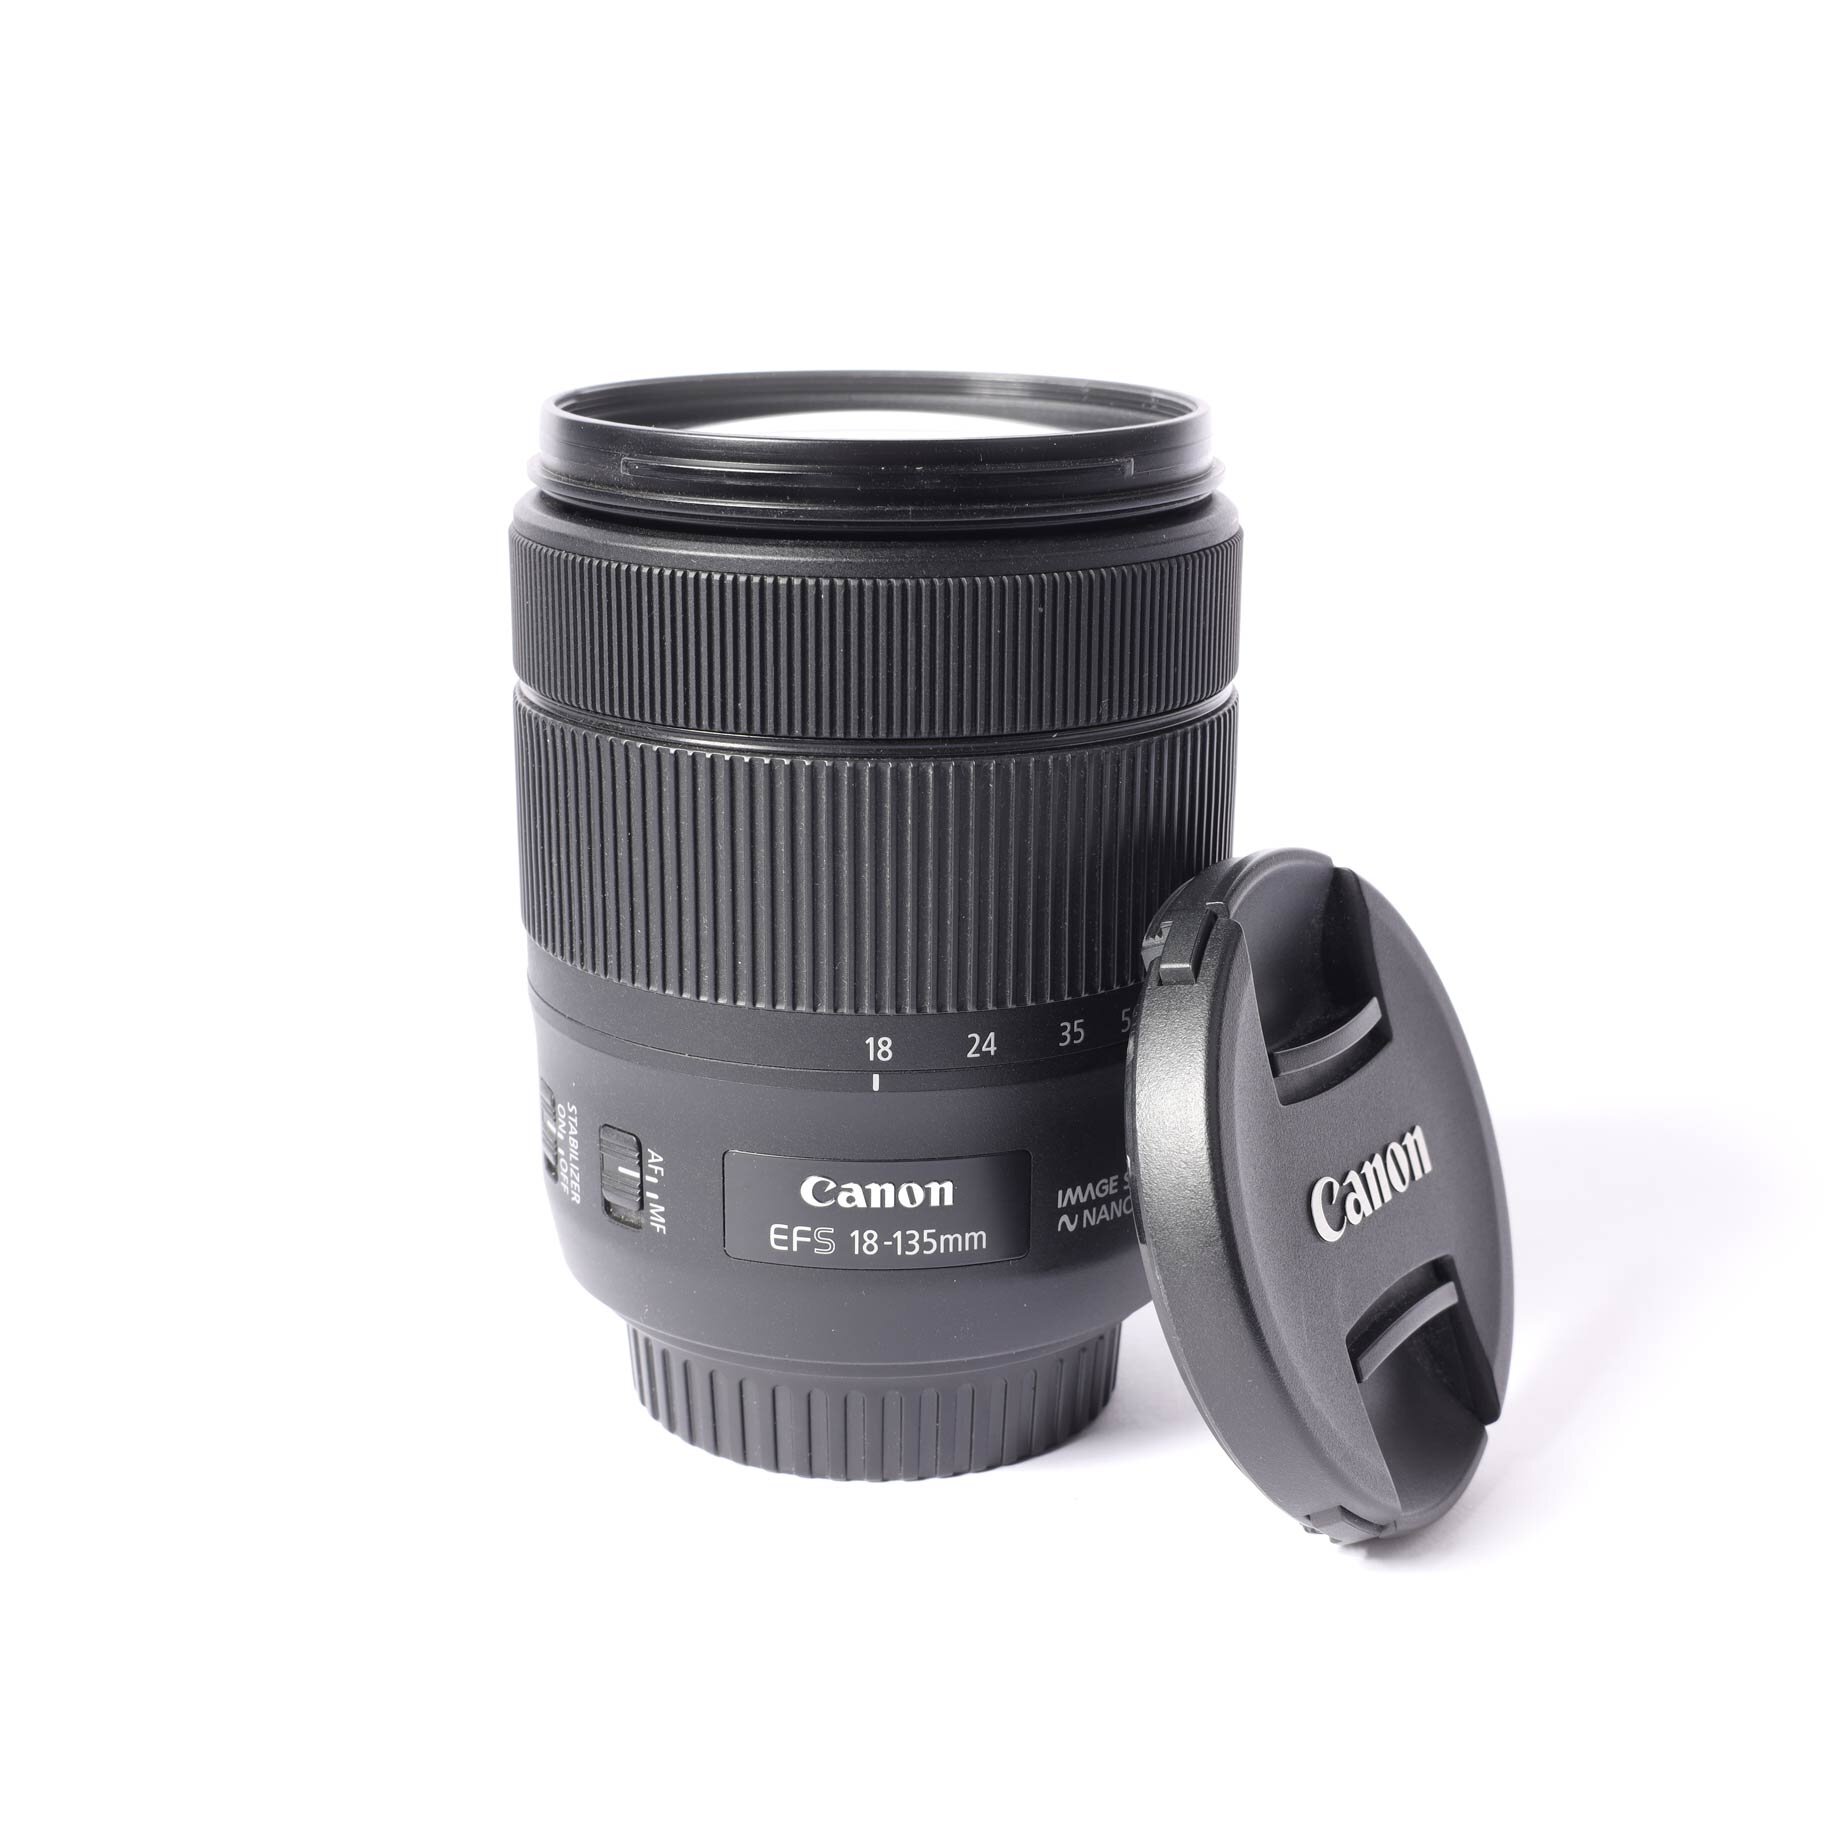 Canon EFS 3.5-5.6/18-135mm IS USM